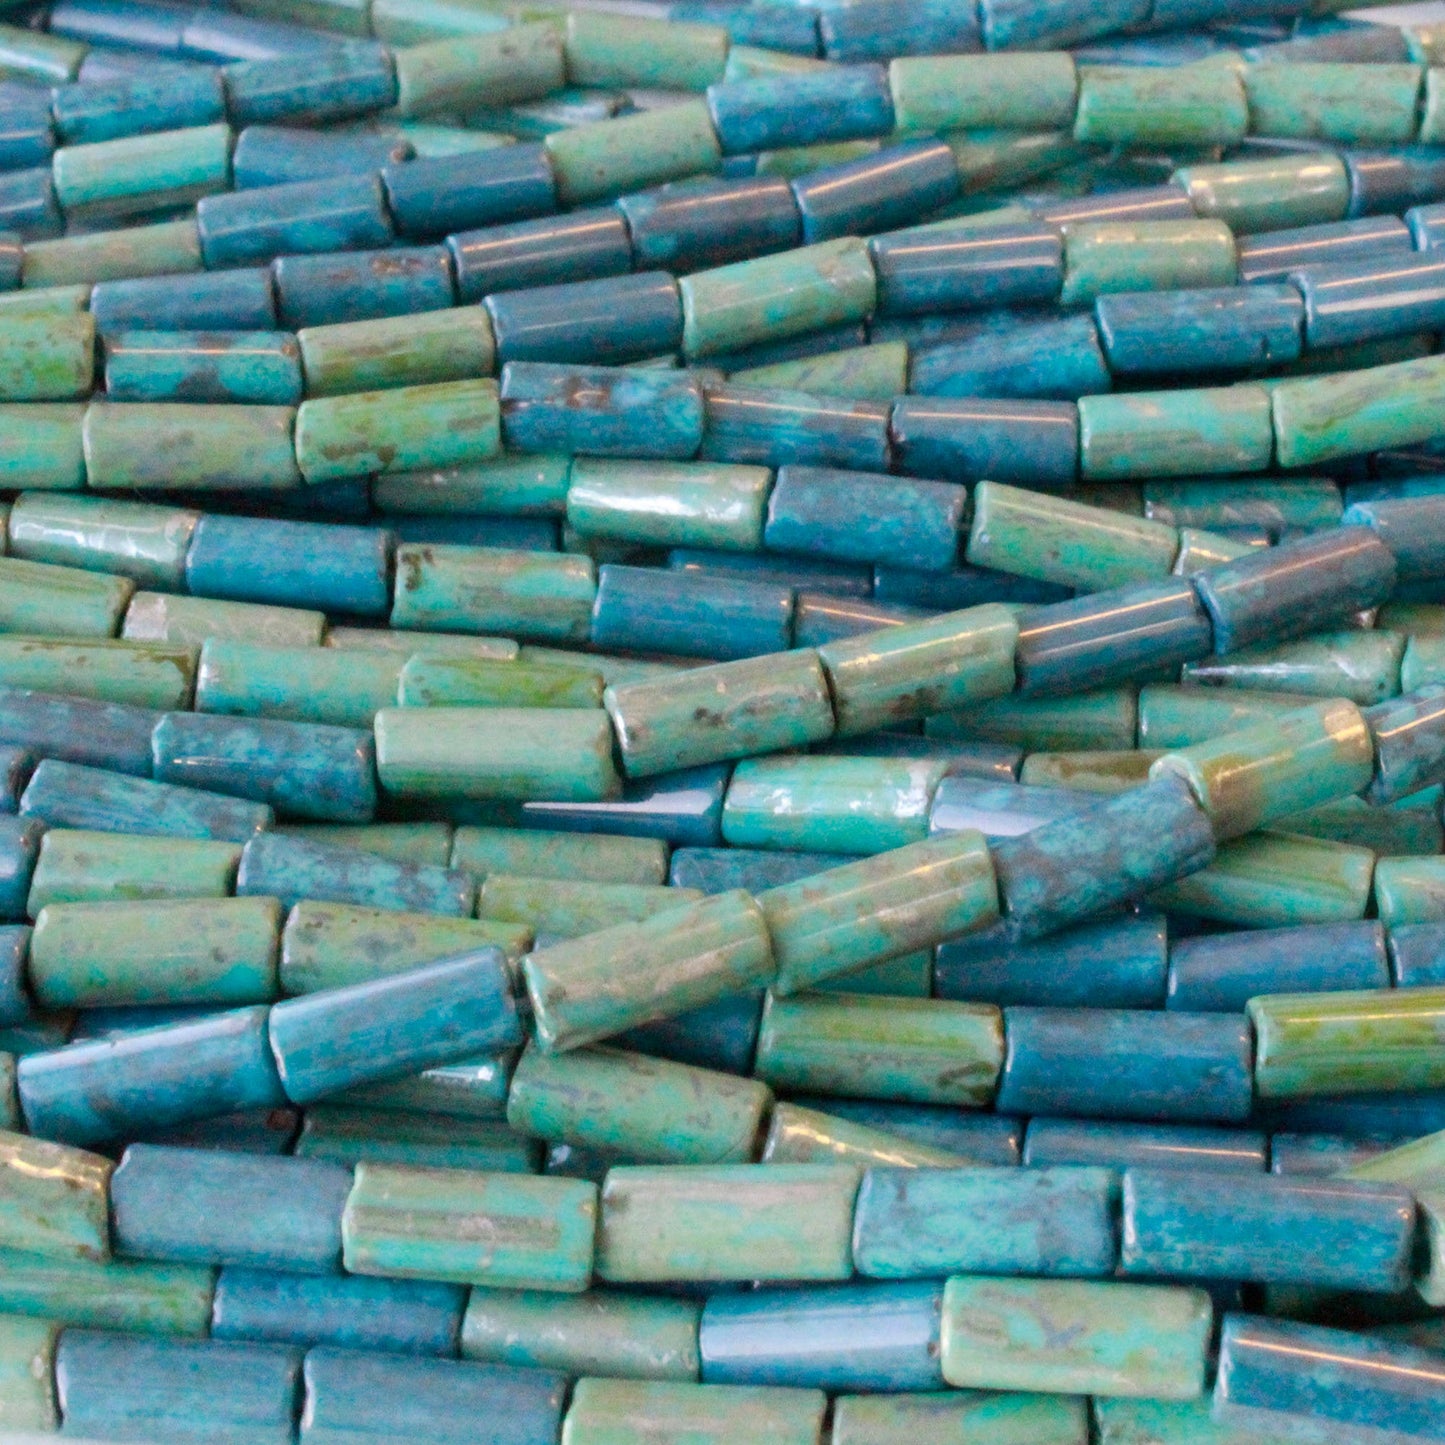 9x4mm Glass Tube Beads - Blue and Green - 20 or 60 Inches